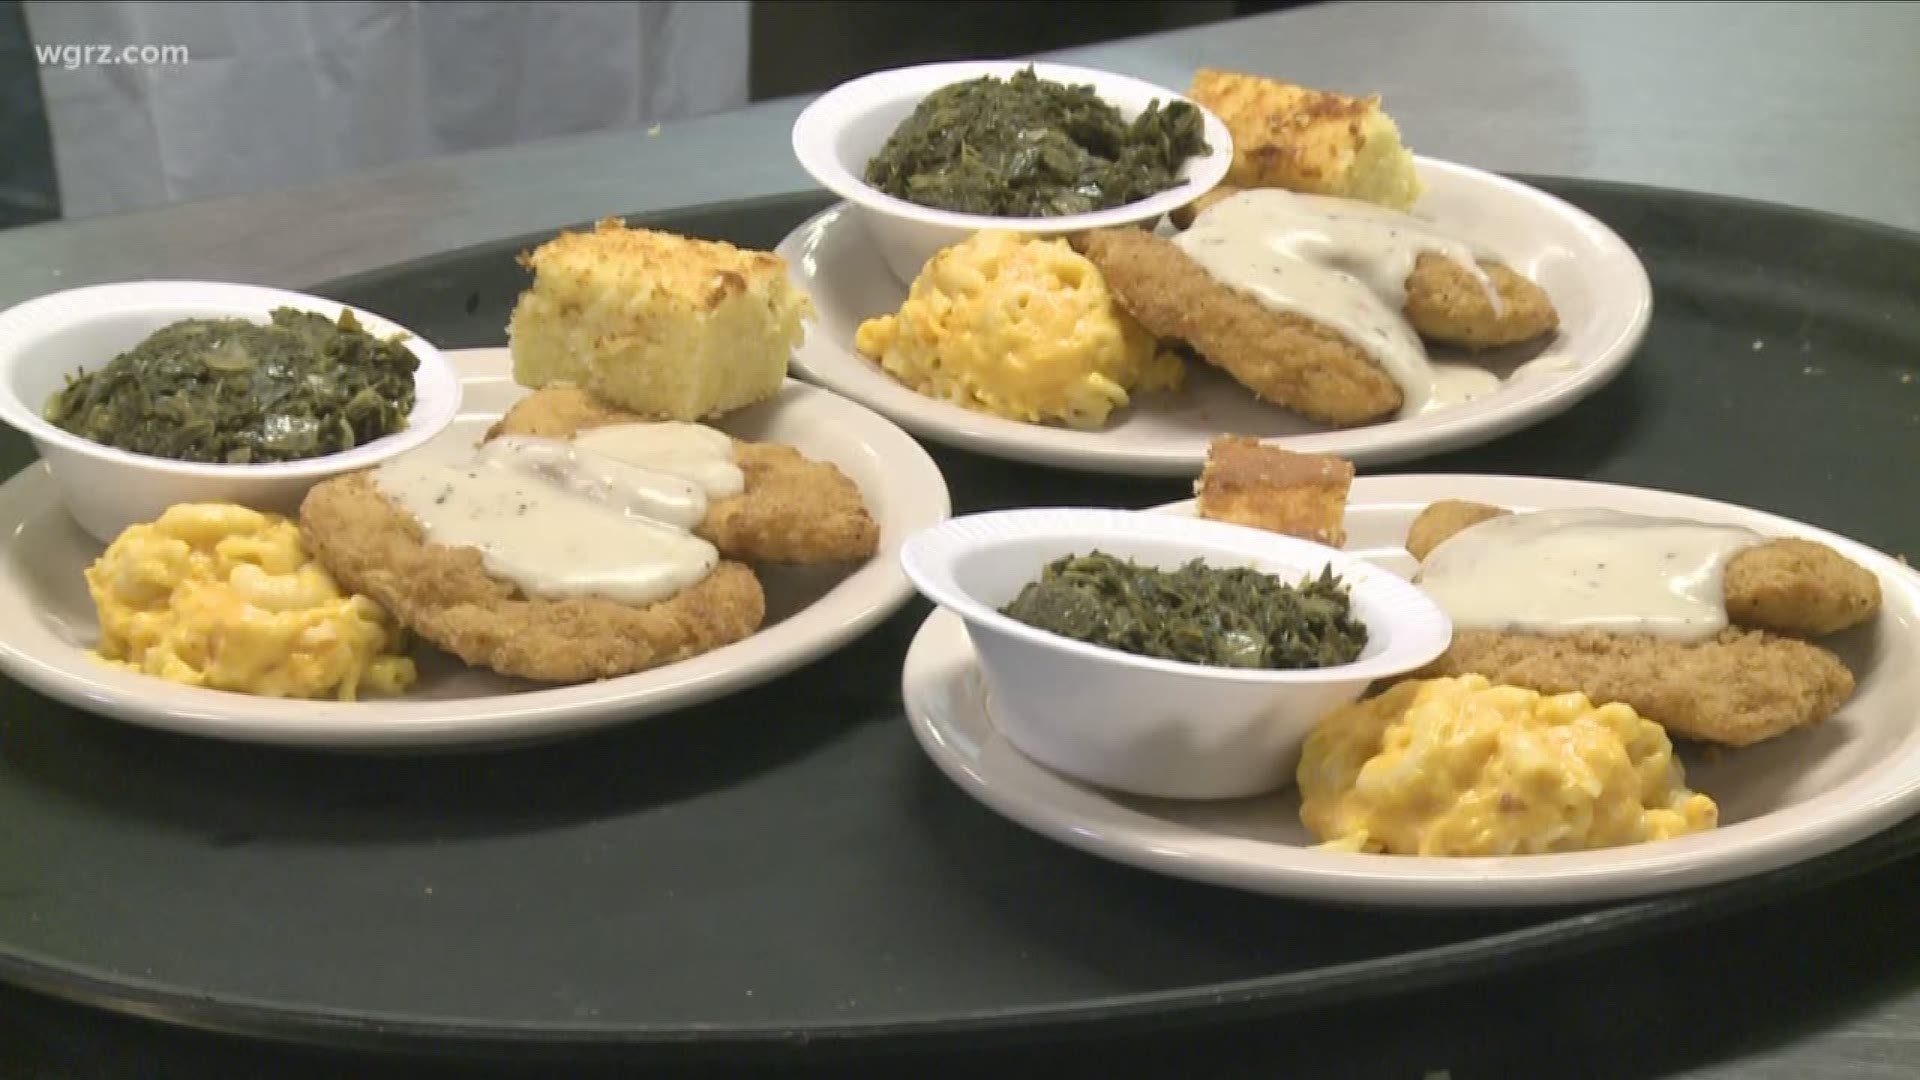 City Mission Celebrates Annual Easter Meal